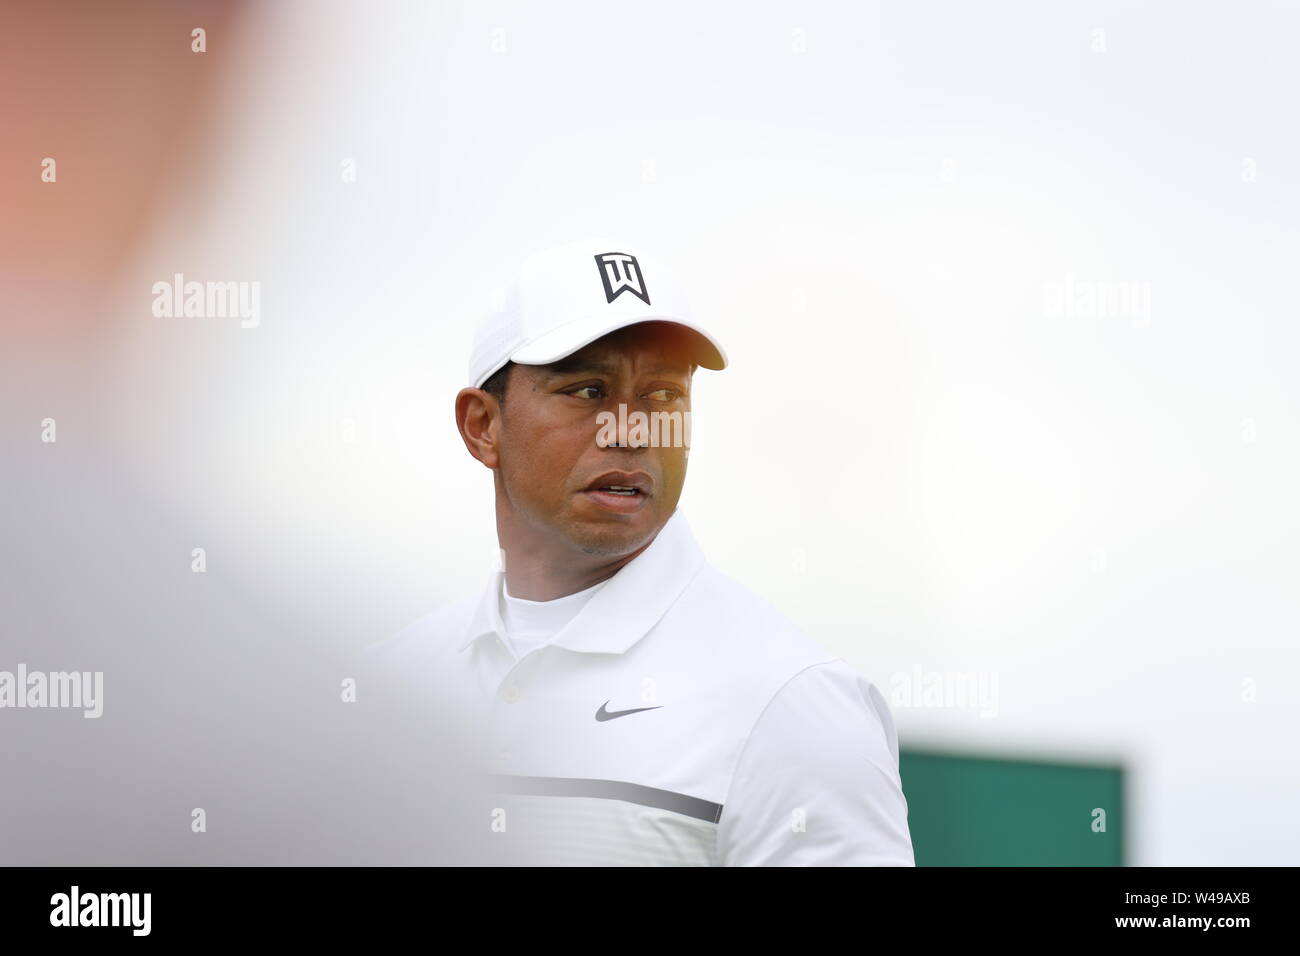 USA's Tiger Woods on the 4th hole during the second round of the 148th British Open Championship at the Royal Portrush Golf Club in County Antrim, Northern Ireland, on July 19, 2019. Credit: Koji Aoki/AFLO SPORT/Alamy Live News Stock Photo